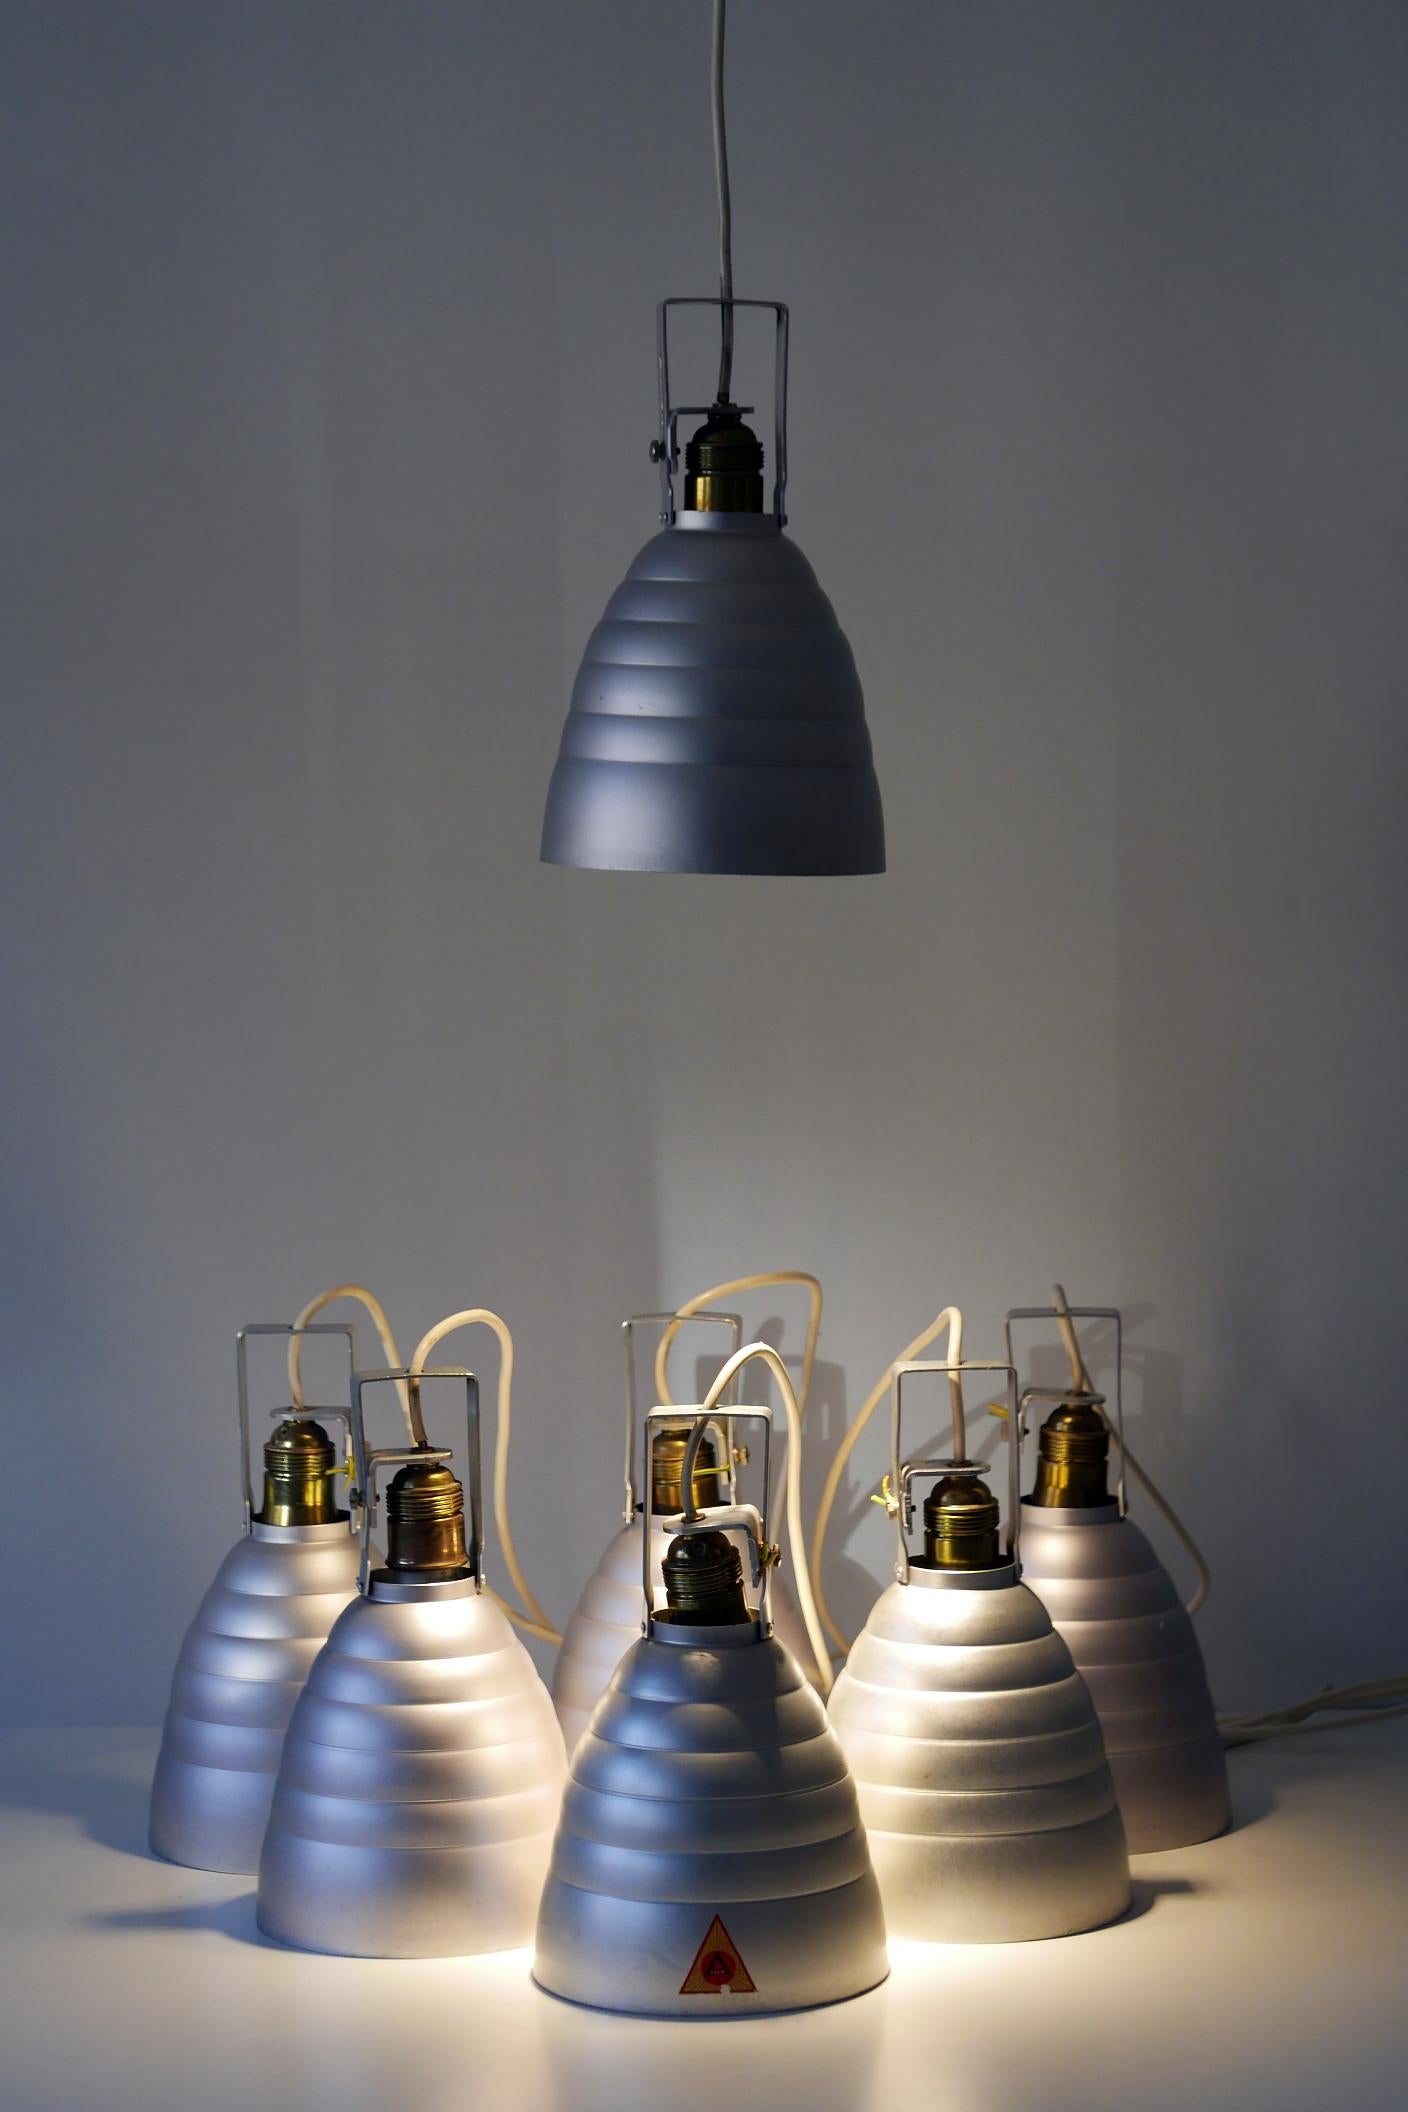 Elegant Mid-Century Modern ceiling spot lights or pendant lamps by Alux, 1950s, Germany. 
Seven identical lamps available!

Executed in aluminium (outside matte, inside glossy), each lamp comes with 1 x E27 / E26 Edison screw fit bulb holder, is